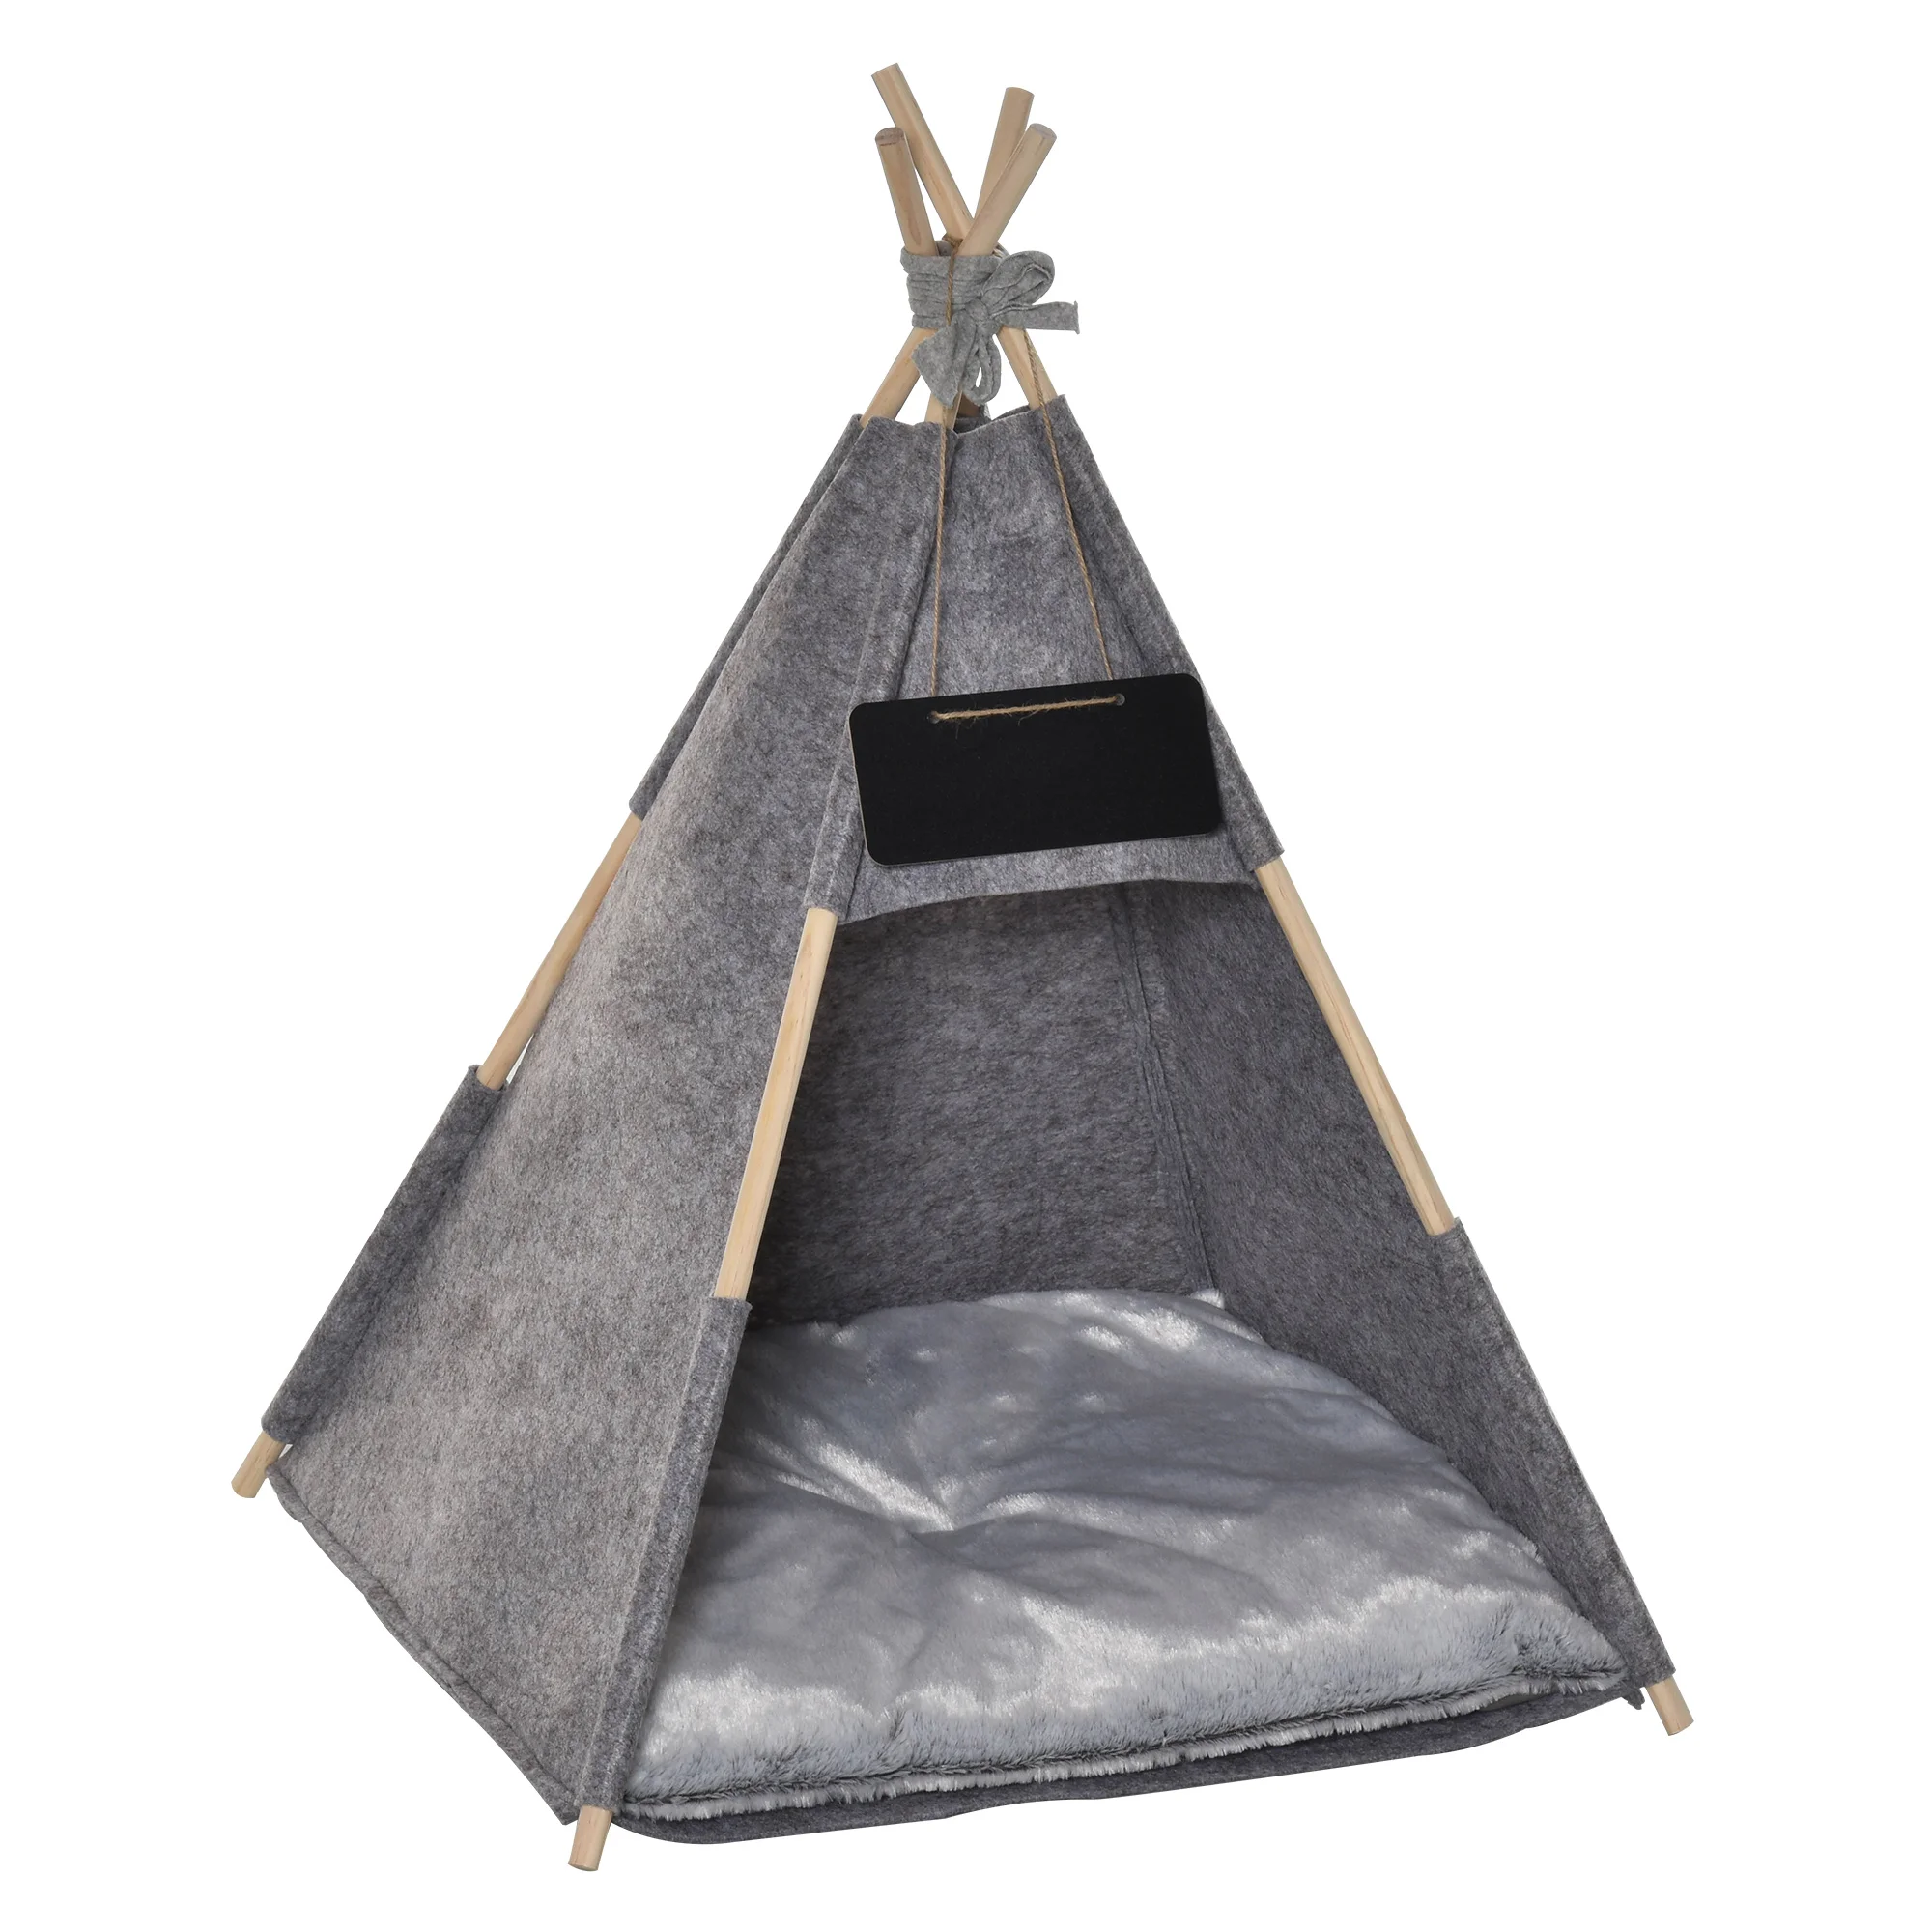 

washable dog bed with thick cushion felt wood luxury pet teepee tent indoor outdoor modern cat portable tent